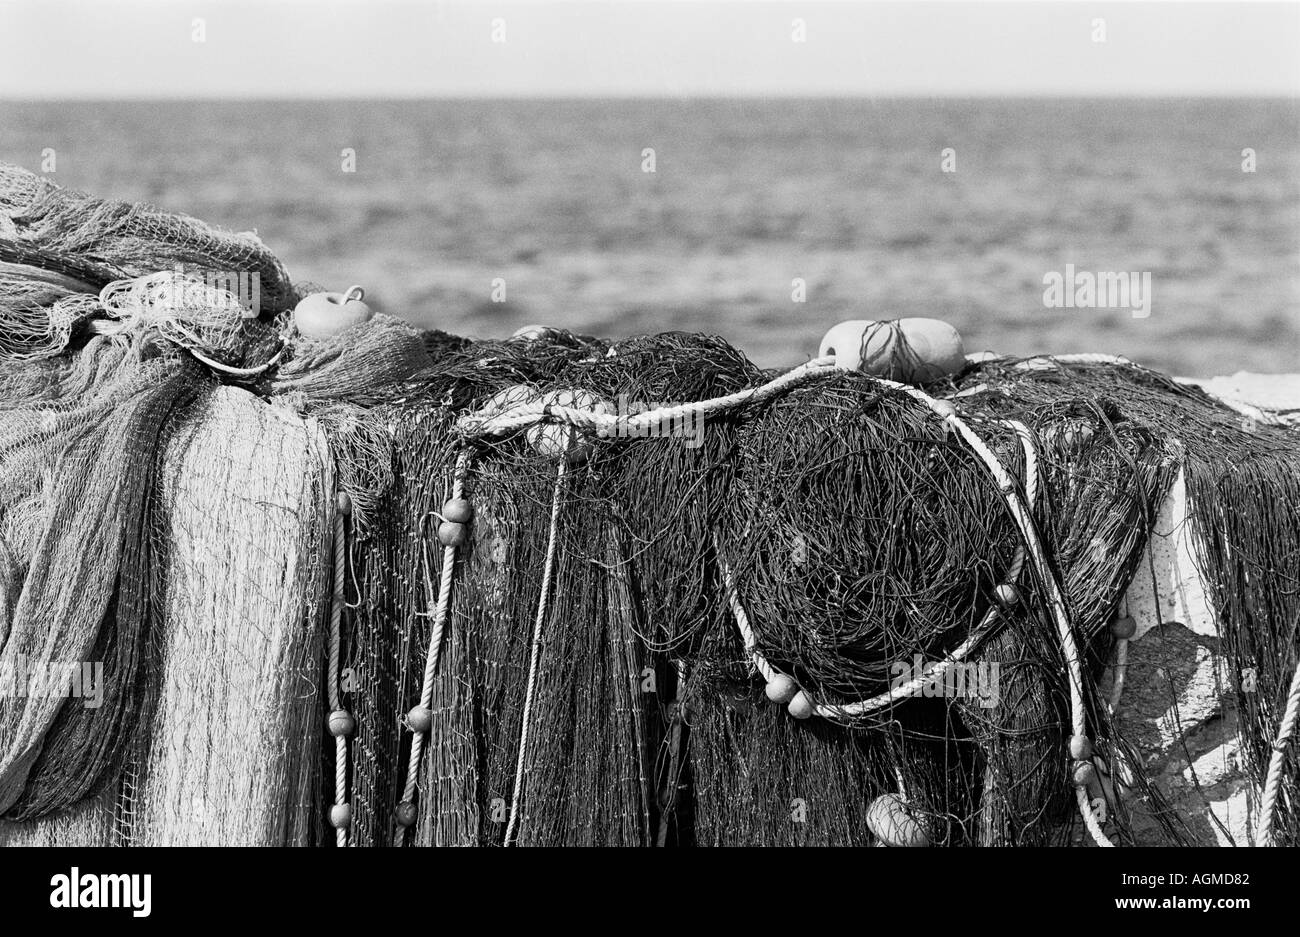 Nets net Black and White Stock Photos & Images - Page 2 - Alamy